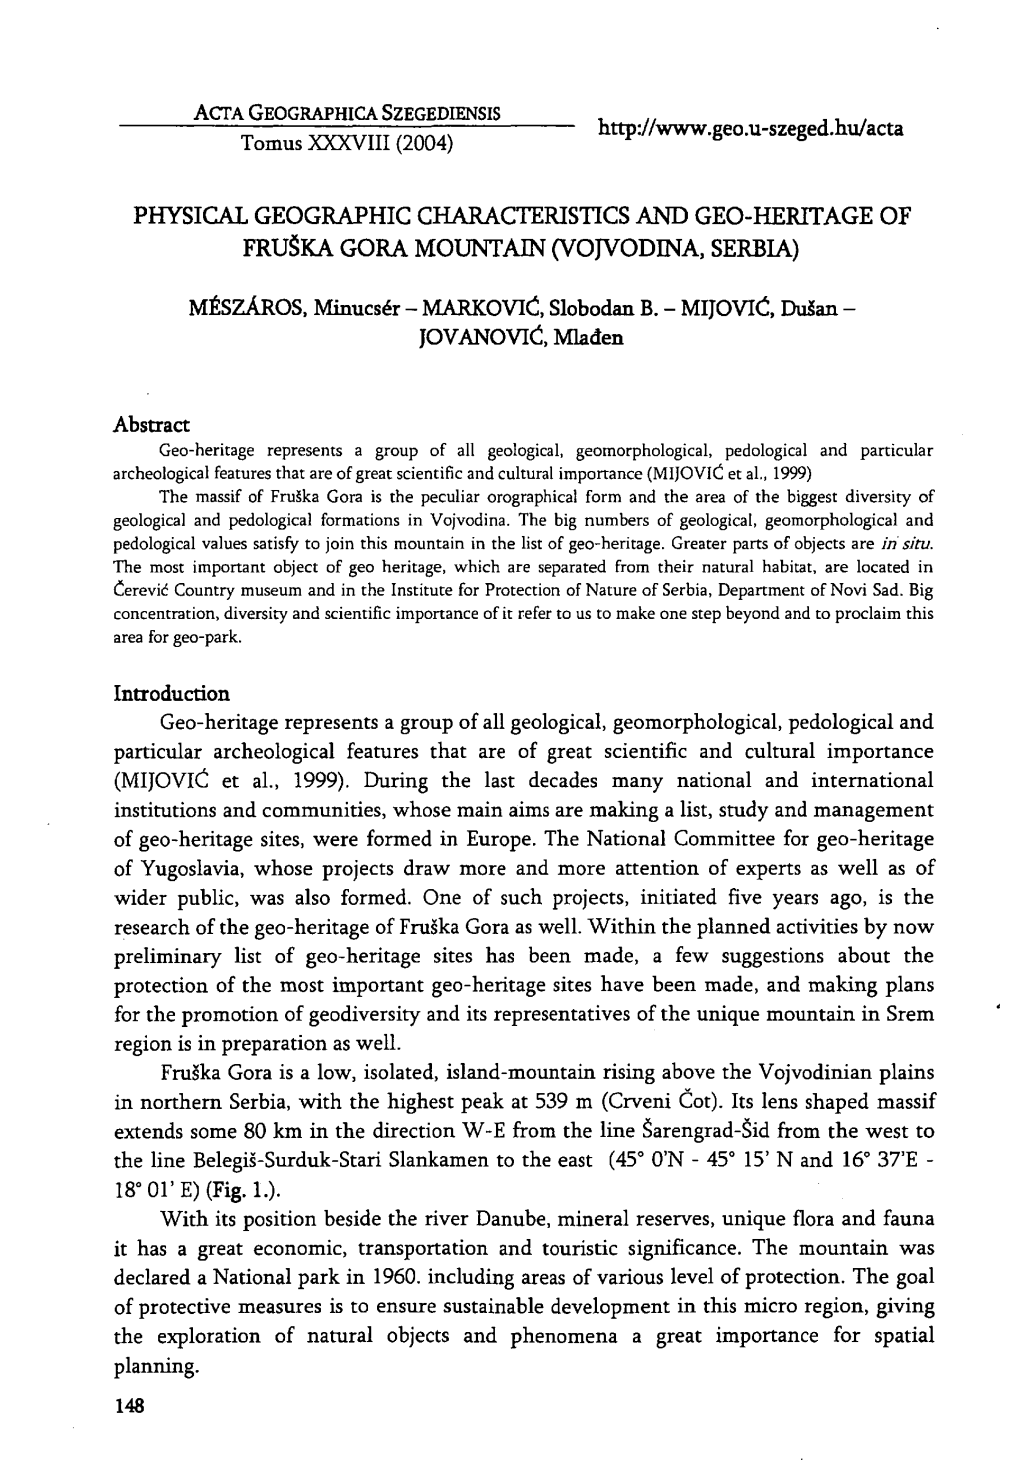 Physical Geographic Characteristics and Geo-Heritage of Fruska Gora Mountain (Vojvodina, Serbia)